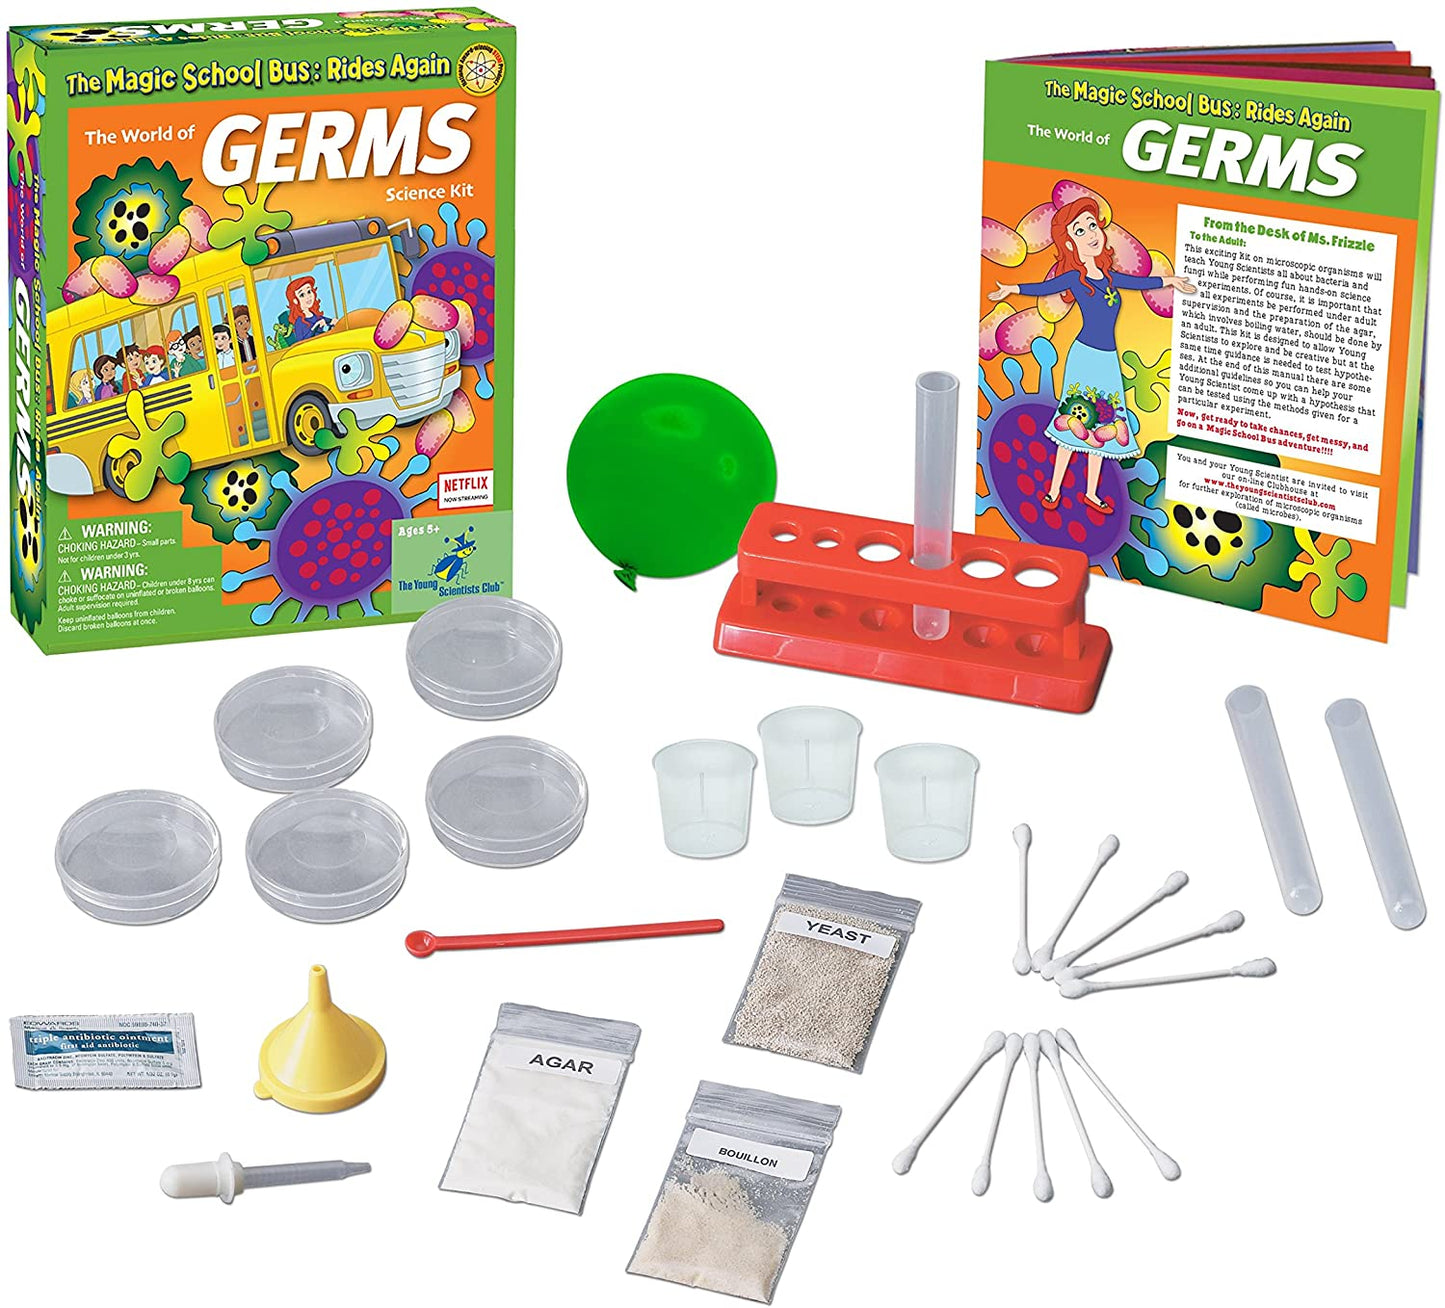 The Magic School Bus Rides Again: The World of Germs